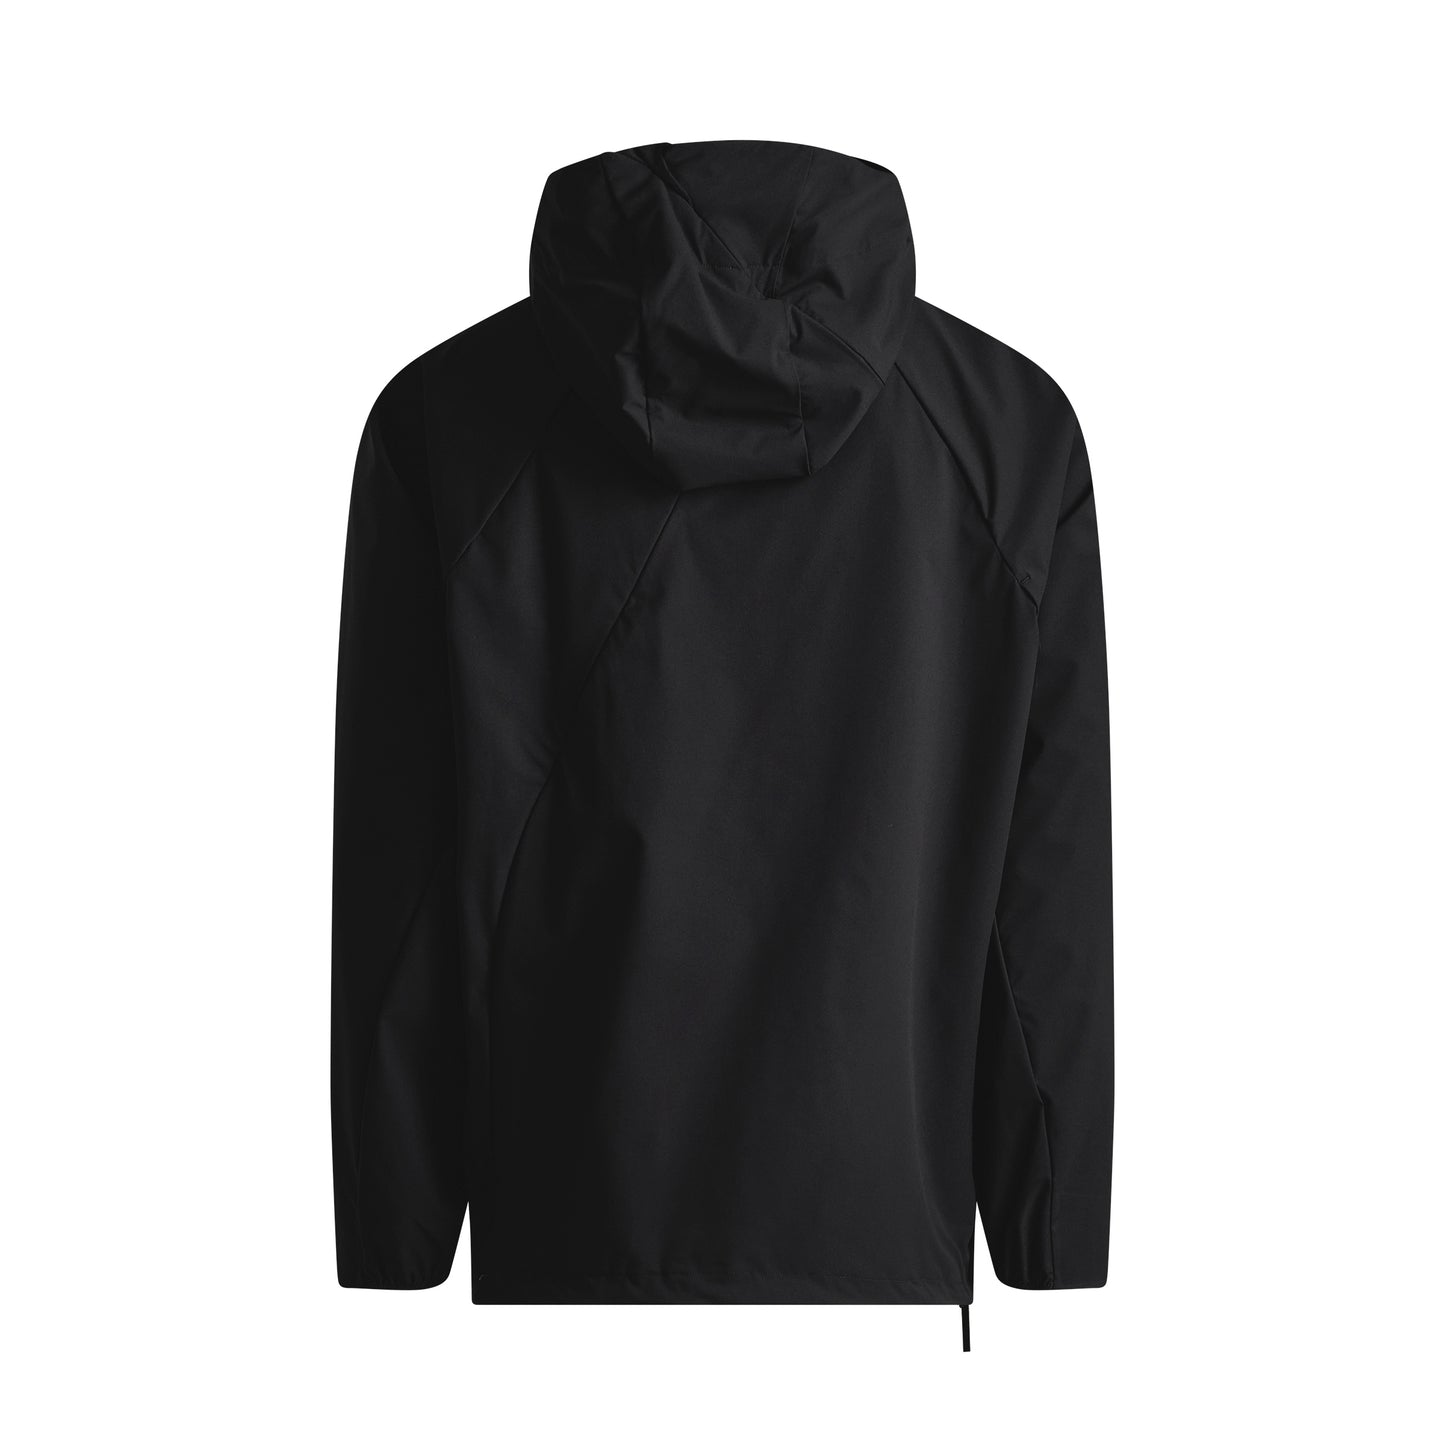 6.0 Technical Jacket (Center) in Black